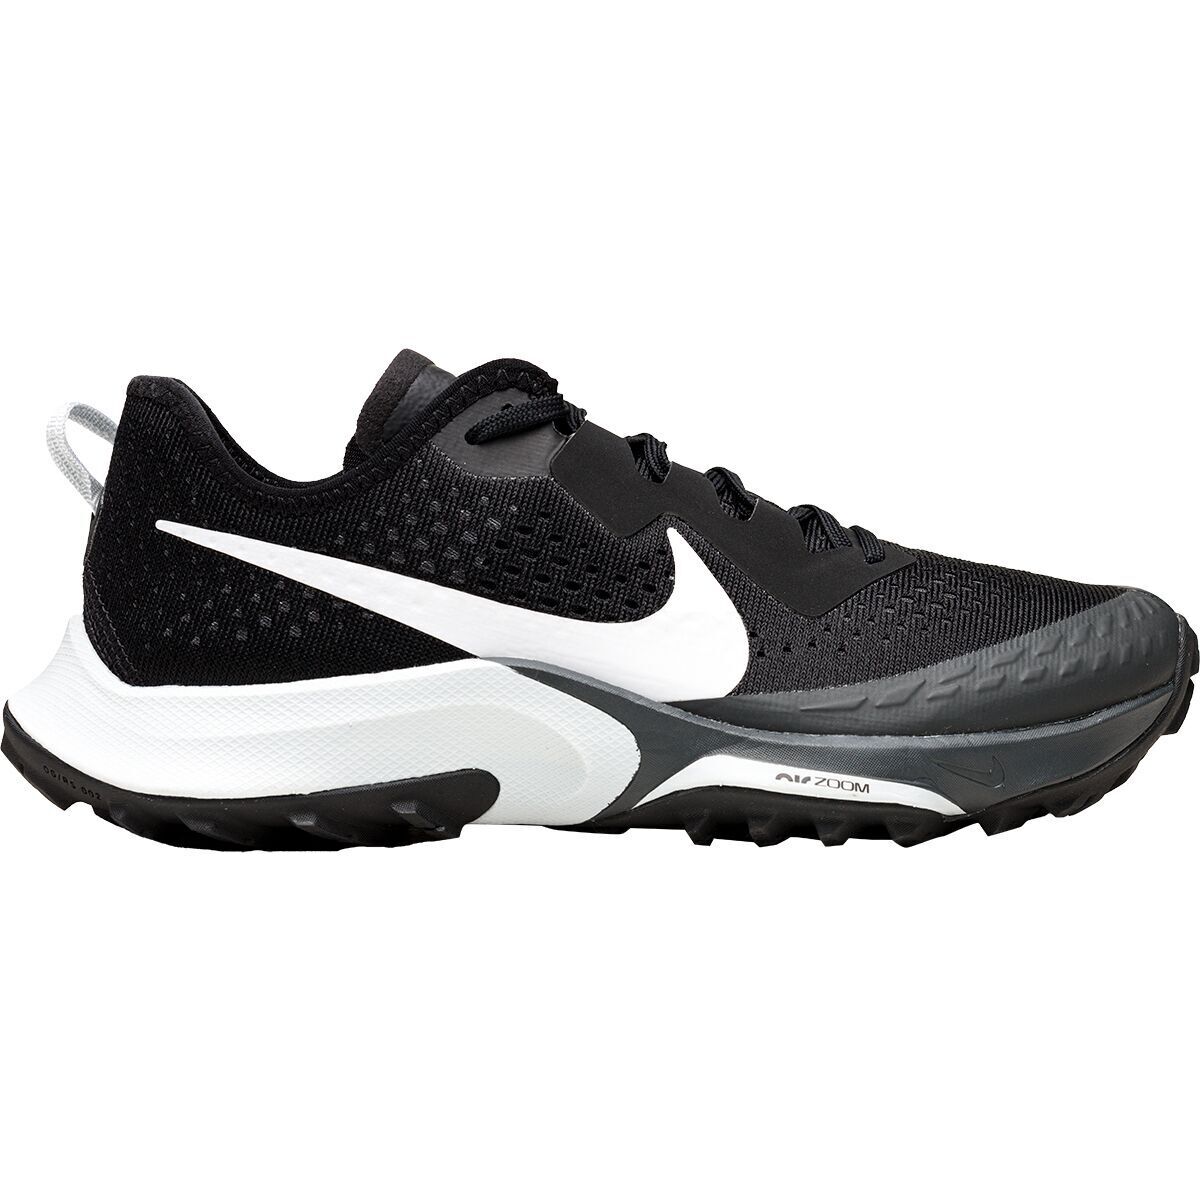 Men's Nike Air Zoom Terra Kiger 7 Trail Running Shoes, CW6062 002 Multi Sizes Black/Pure Platinum/Anthracite